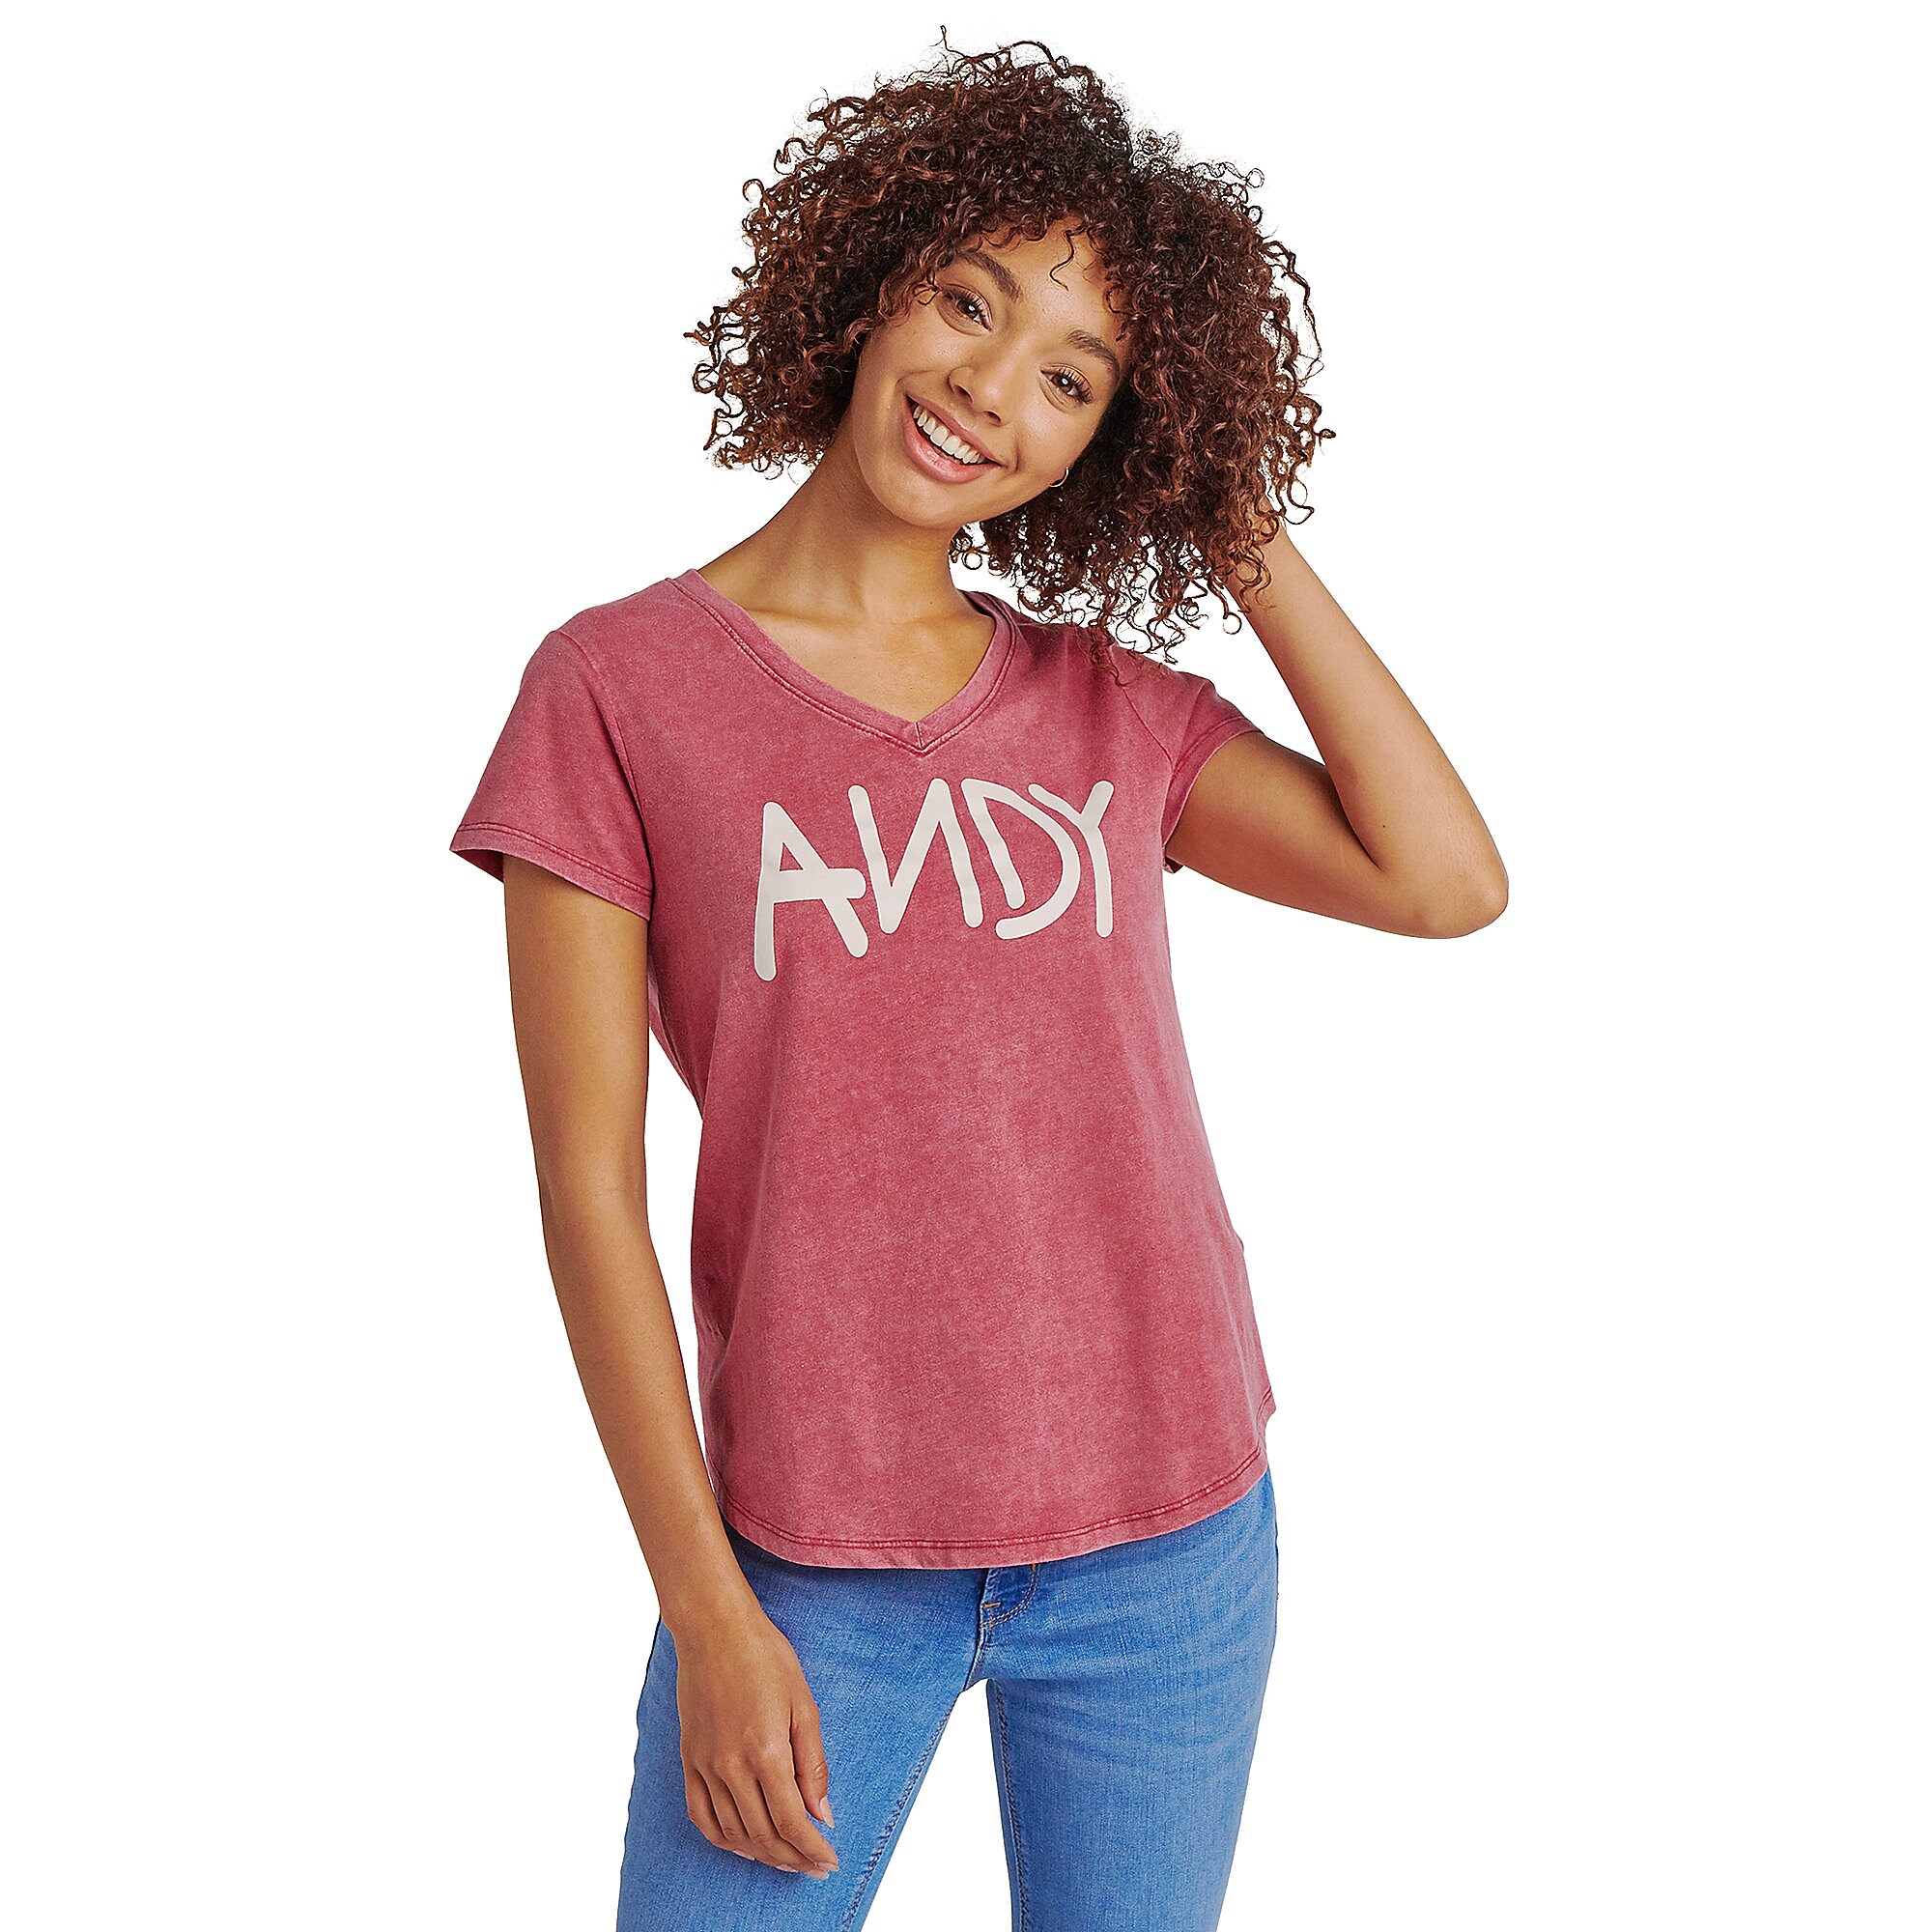 Andy T-Shirt for Women - Toy Story